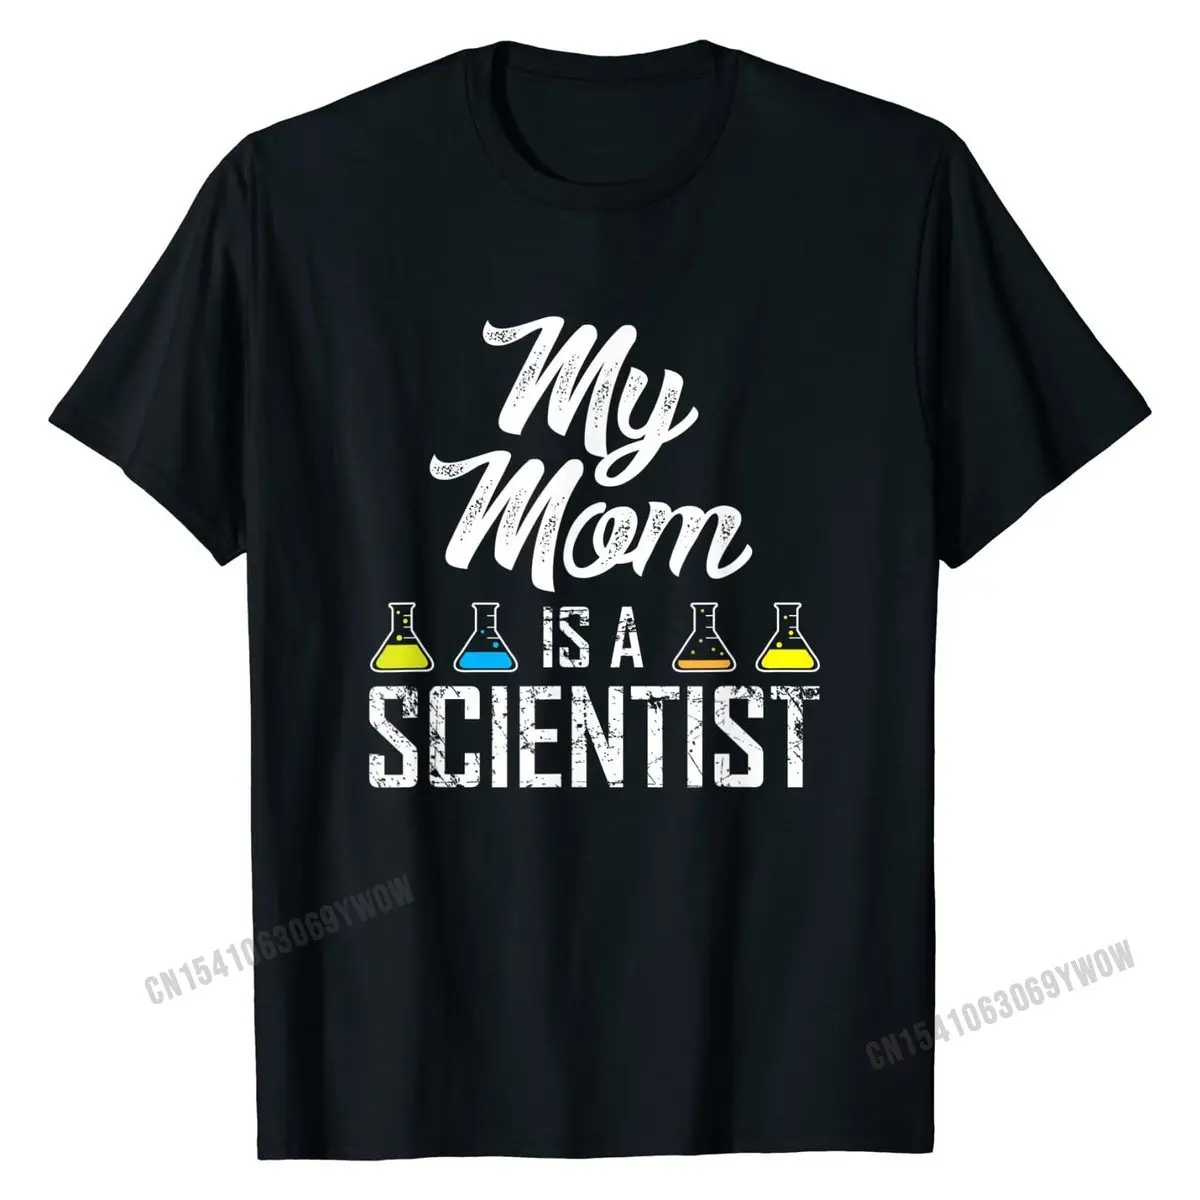 

My Mom is A Scientist Shirt, Protest March for Science Gift FunnyCustom Tops Shirts Funny Cotton Men Top T-shirts